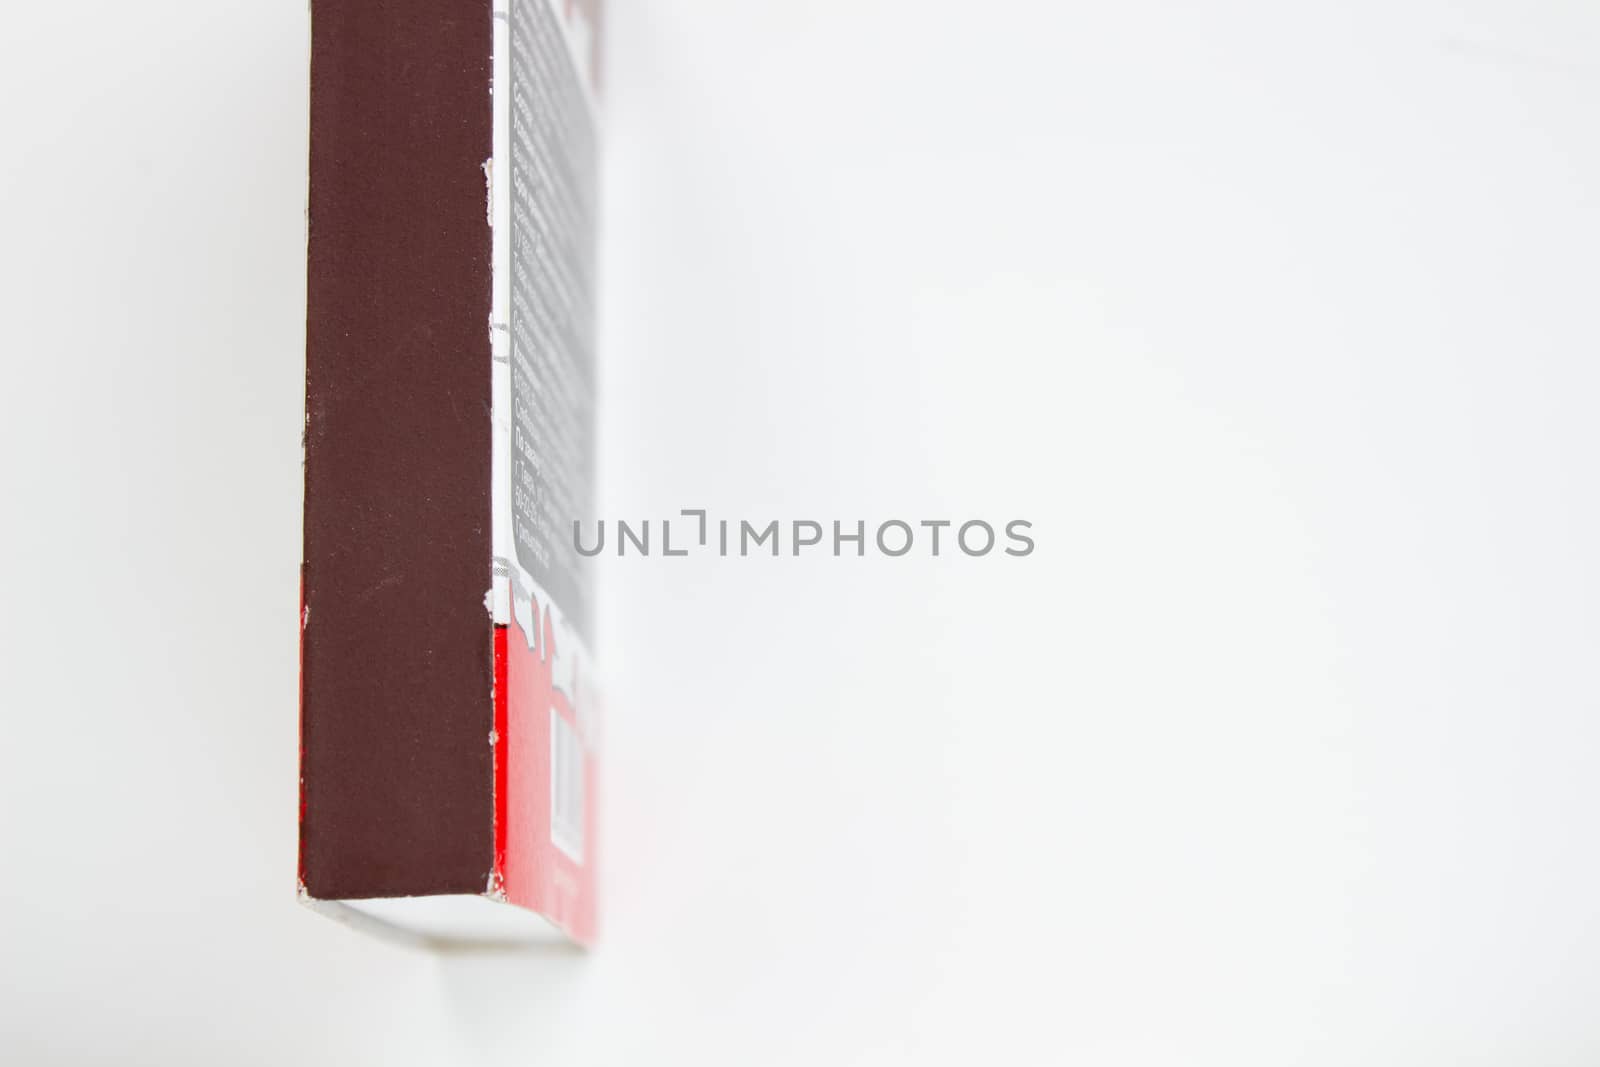 Hunting waterproof matches in a paper box isolated on white background.